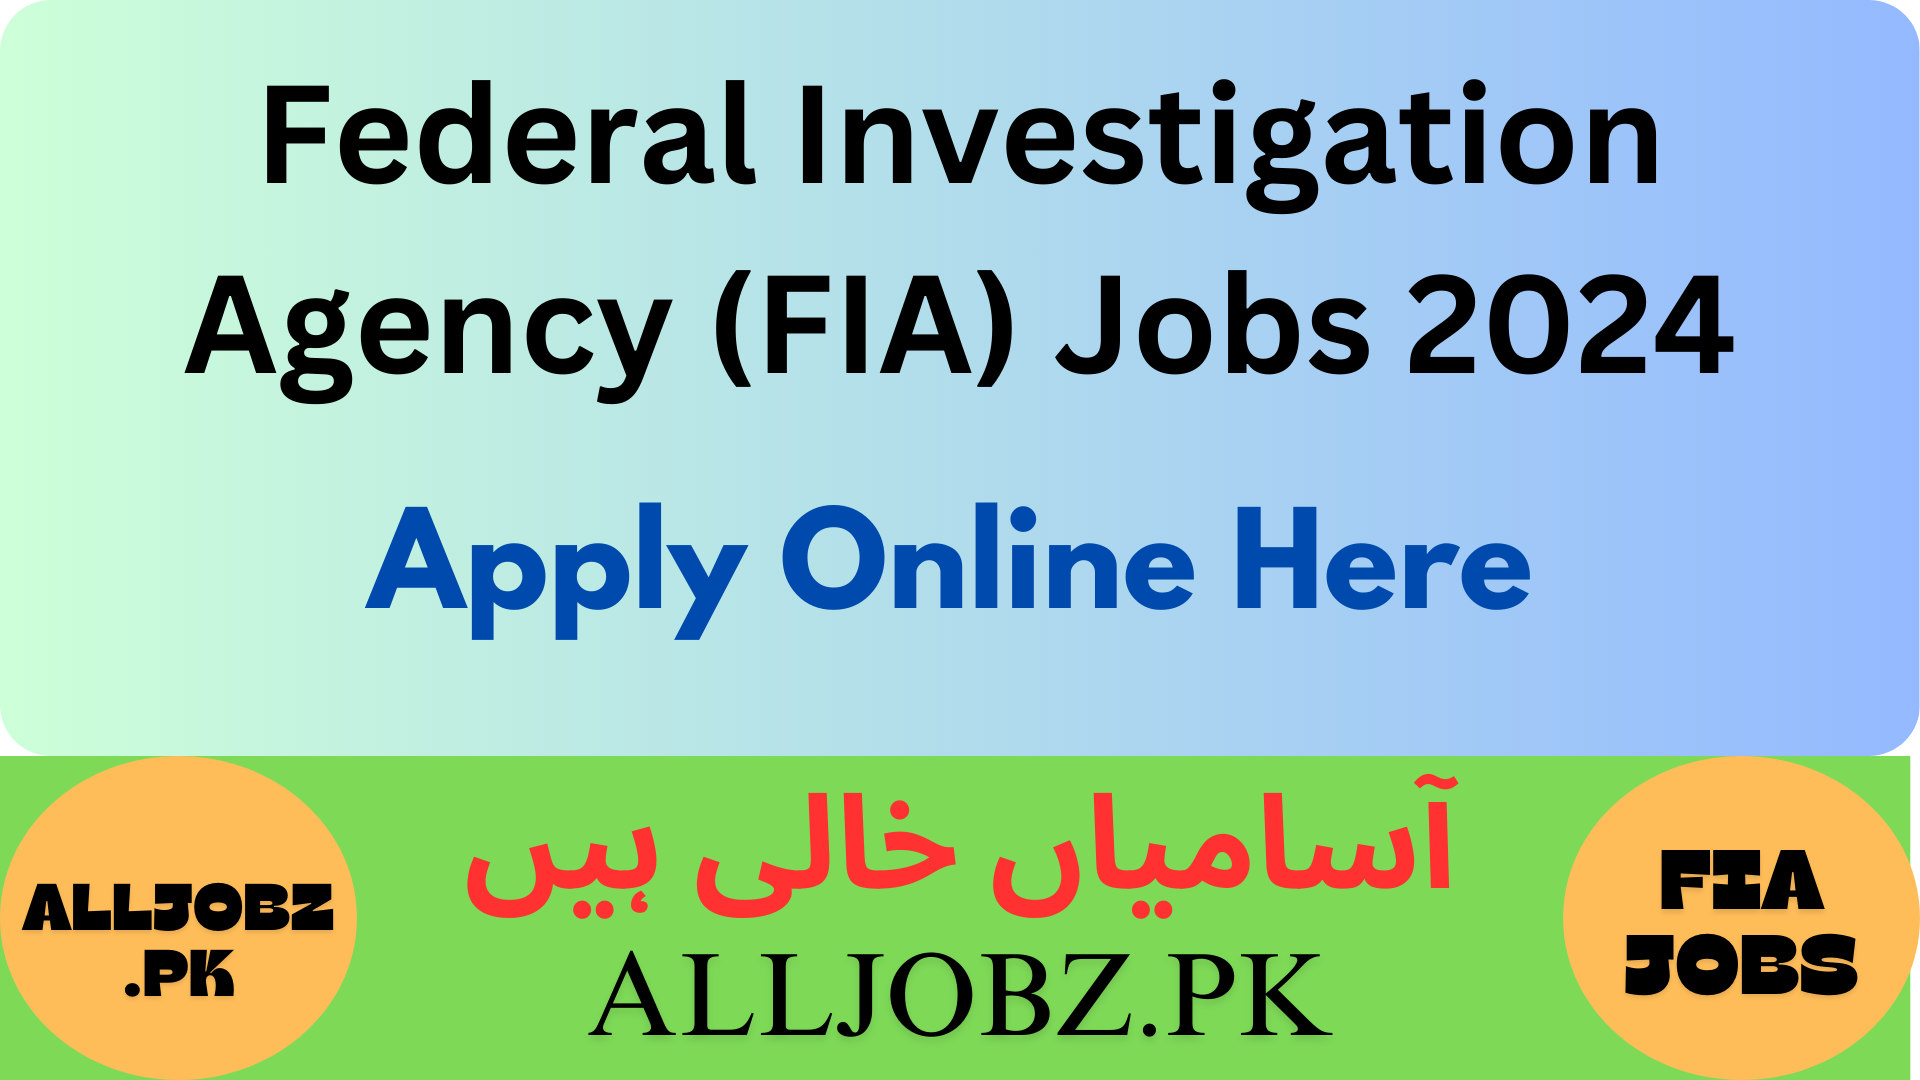 Federal Investigation Agency Fij Jobs For 2024 Apply Online, Inviting Applications For Various Positions. These Include Roles Such As Assistant, Sub-Inspector, Asi, Ldc, Constable, Driver, Naib Qasid, Sweeper, And Cook, Among Others. Www.fia.gov.pk Online Apply 2024, Federal Investigation Agency Fia Jobs 2024 Apply Online, Federal Investigation Agency Fia Jobs 2024 Karachi, Fia Jobs Advertisement, Fia Jobs 2024 Last Date, Fia Jobs 2024 Advertisement Pdf, Jobs.fia.gov.pk Login, Fia Job Portal. The Fia Seeks Qualified And Dedicated Individuals To Join Its Team, Ensuring The Integrity And Security Of Pakistan. Candidates Must Meet Specific Educational And Physical Requirements And Adhere To The Application Process Outlined On The Official Fia Website. This Recruitment Drive Offers A Significant Opportunity For Individuals Committed To Upholding The Law And Contributing To National Security. This Memorandum Announces The Approval For Filling 199 Vacant Positions In The Federal Investigation Agency (Fia) As Follows: